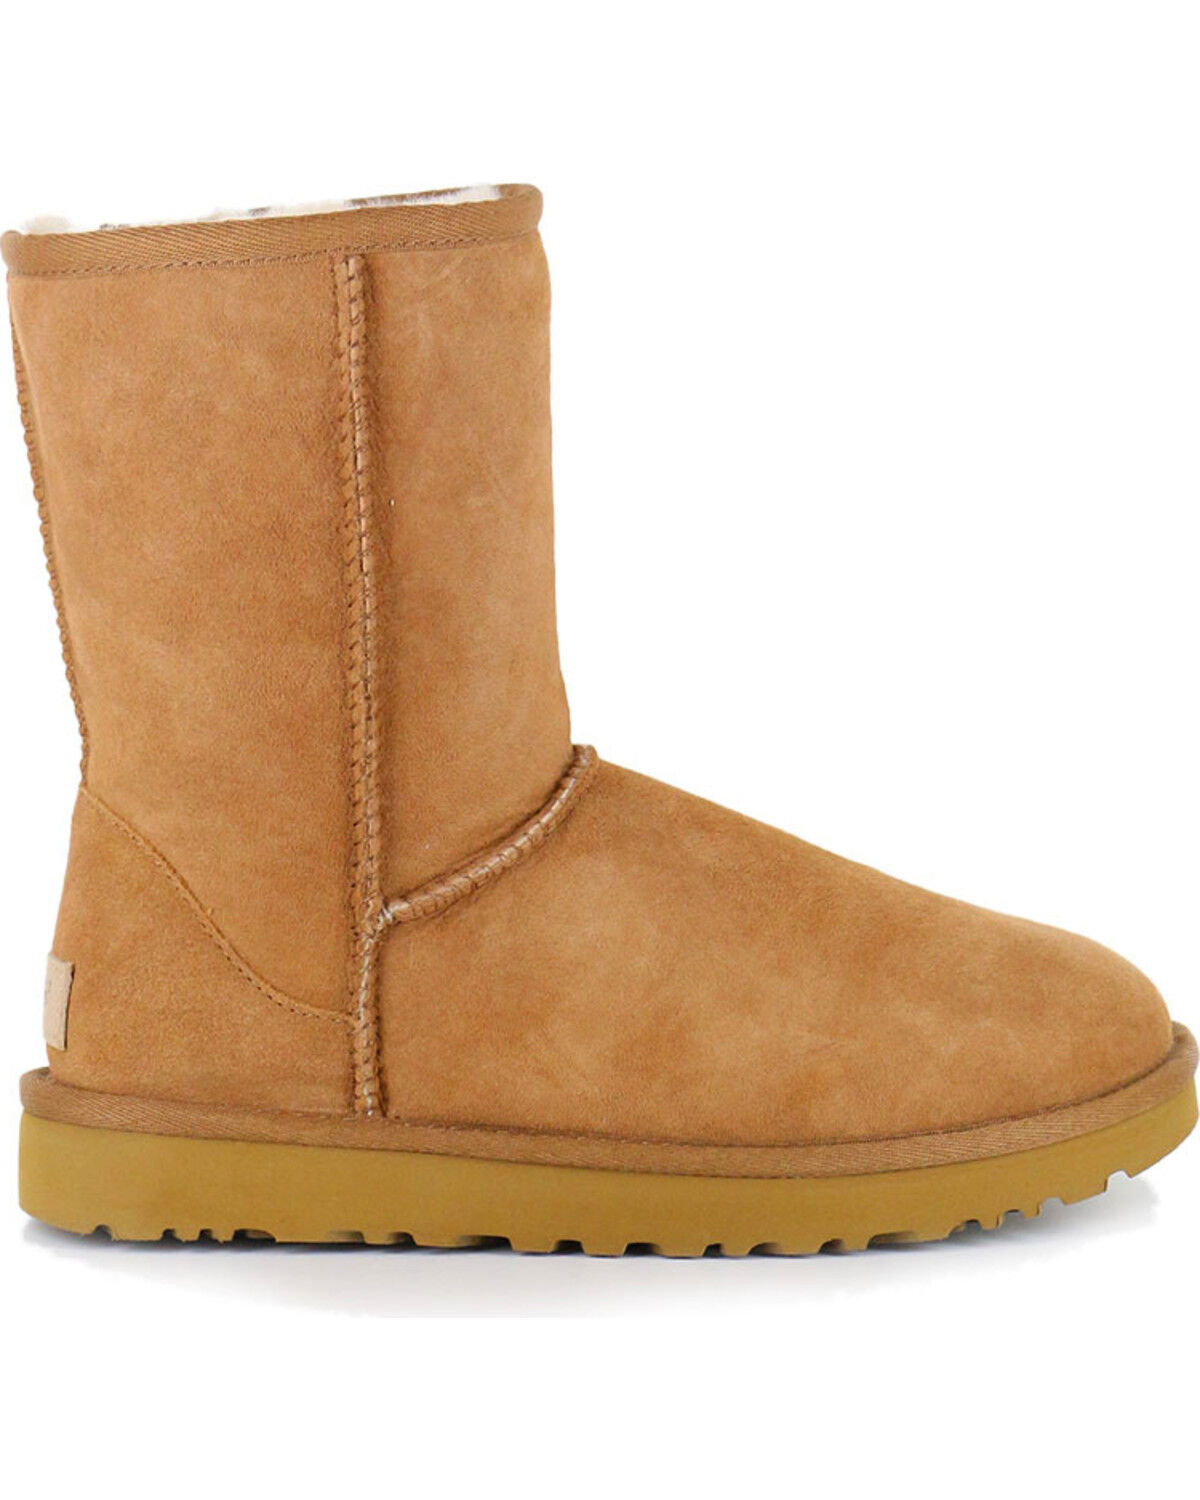 where sells ugg boots